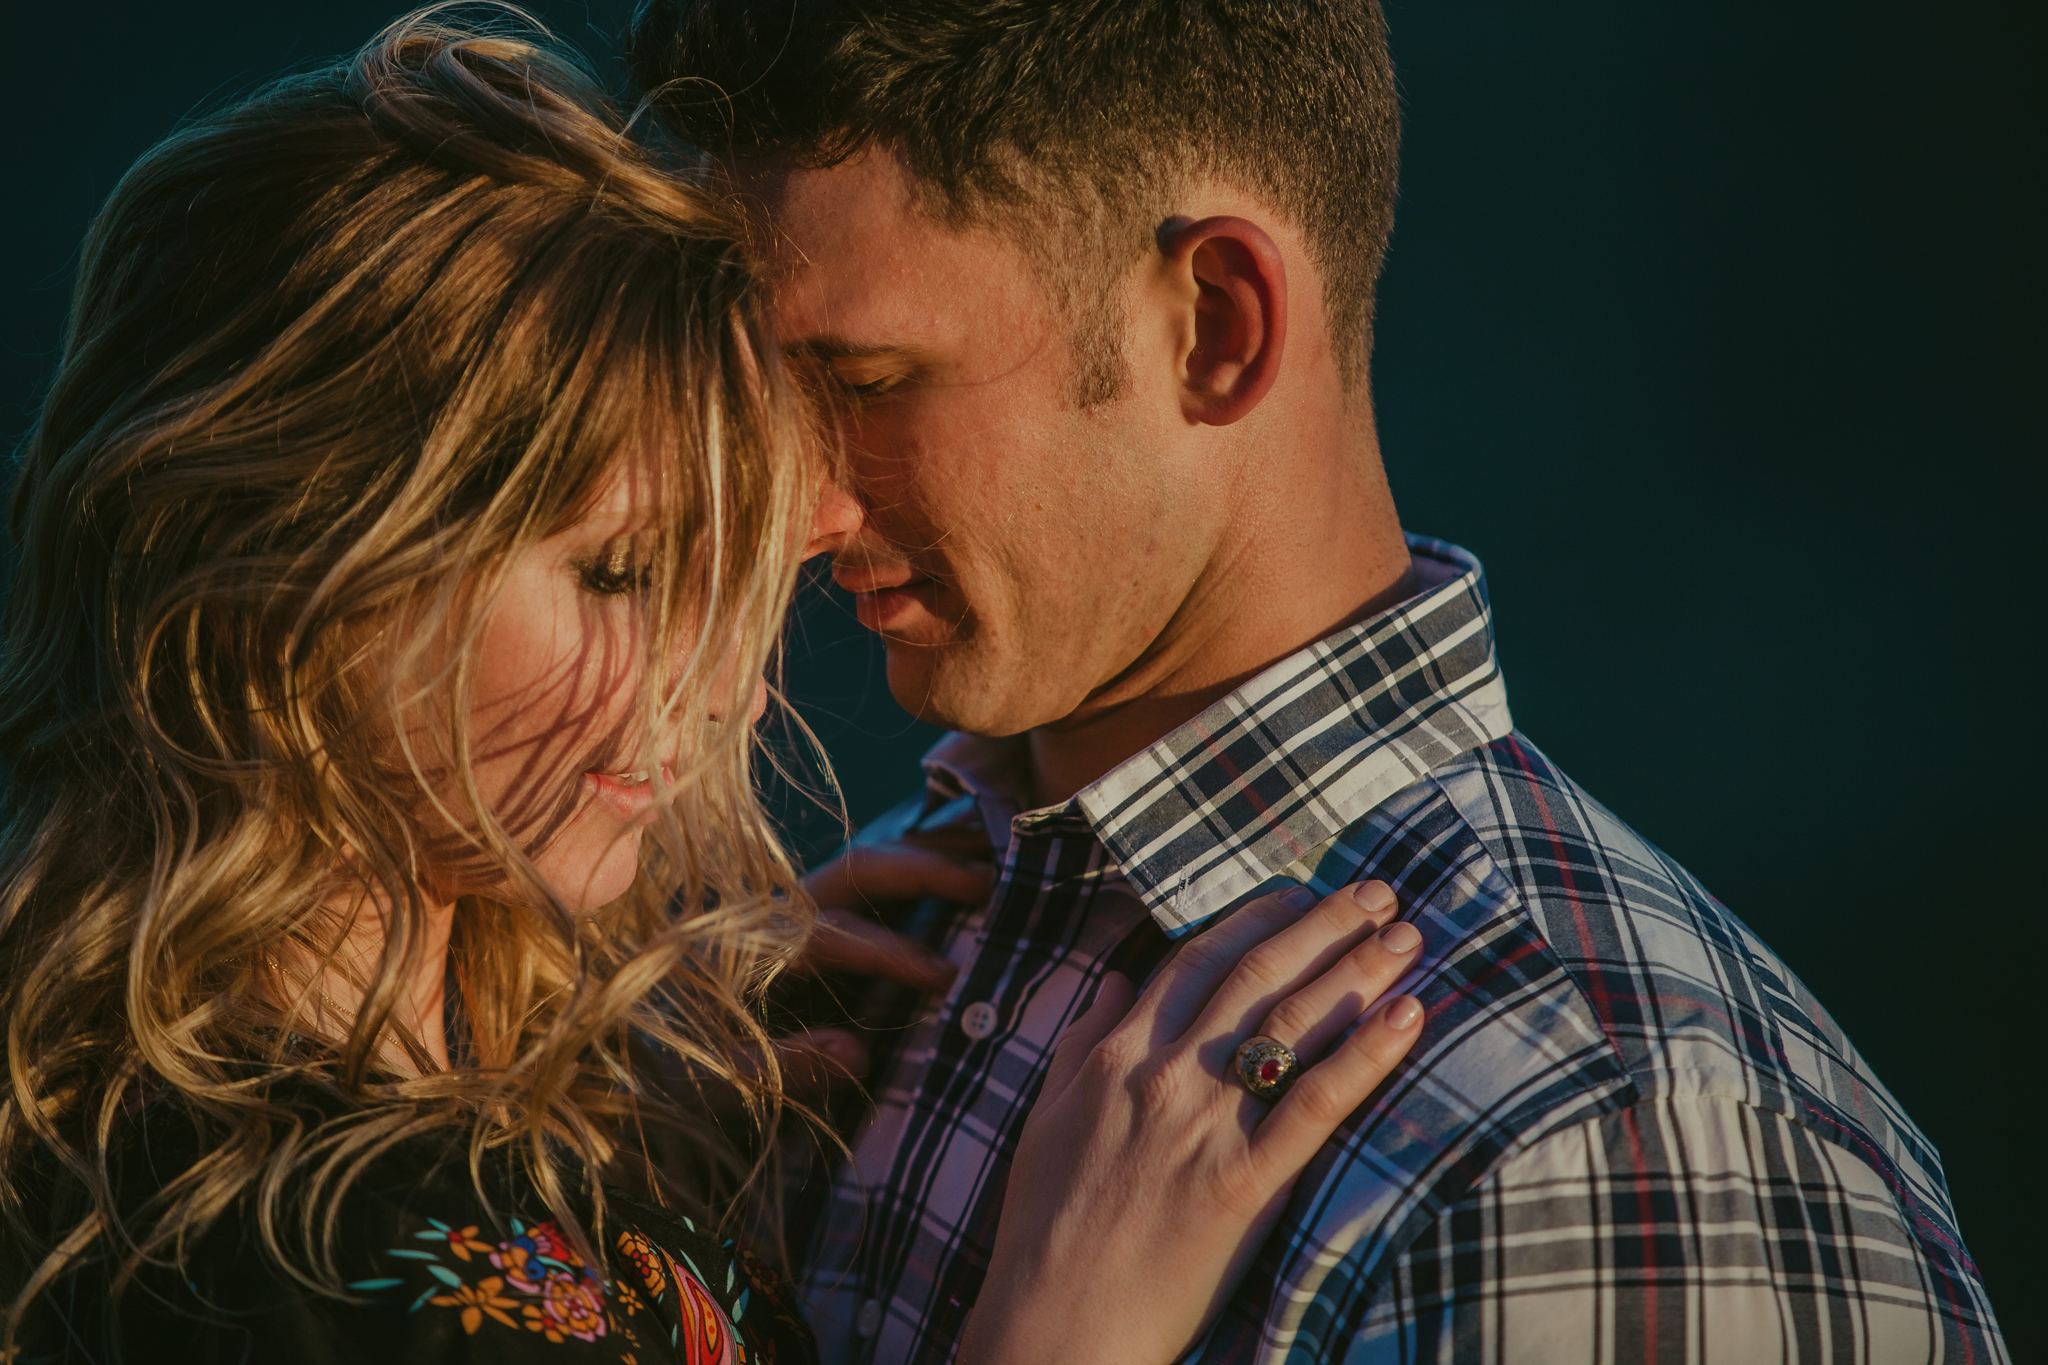 This romantic moment was captured by Mabyn Ludke Photography during Mallory & Peter's Blue Ridge Parkway engagment session